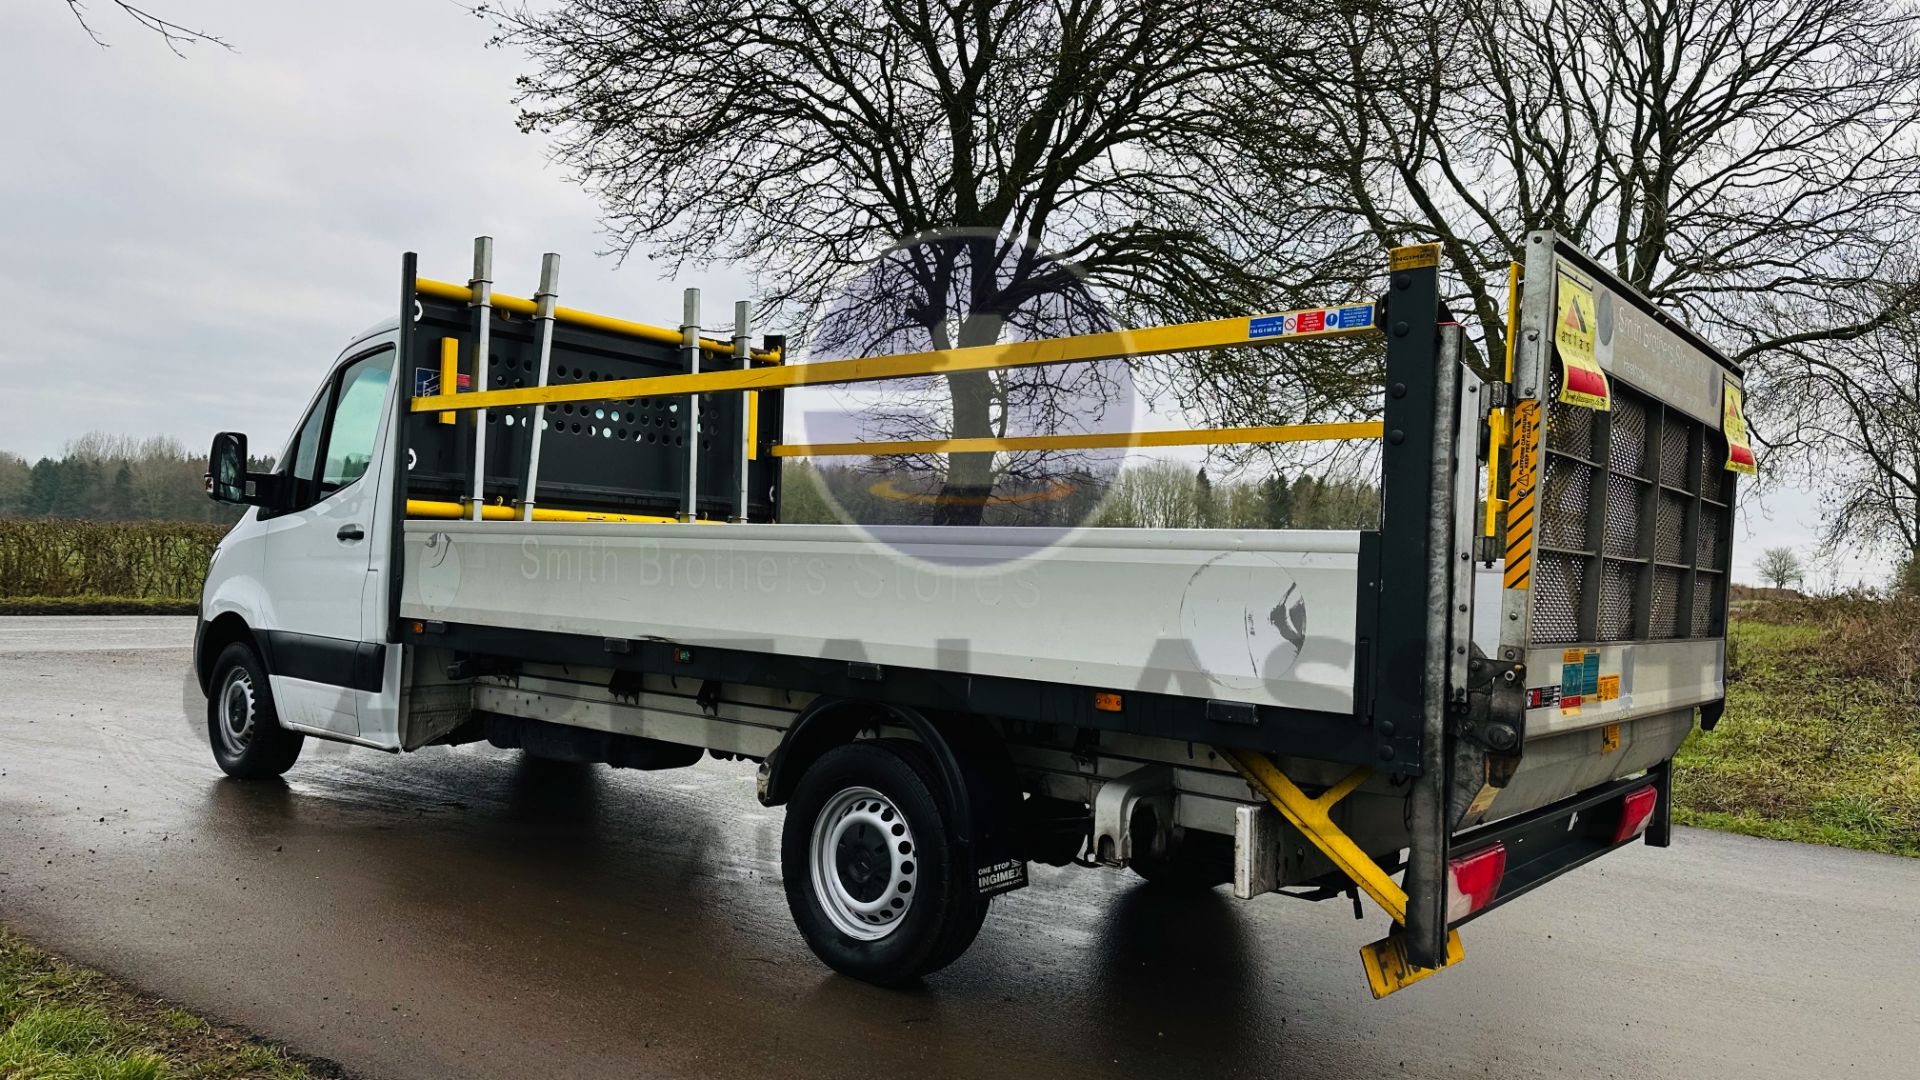 MERCEDES-BENZ SPRINTER 314 CDI *LWB - DROPSIDE* (2019 - EURO 6) AUTOMATIC *TAIL-LIFT* (3500 KG) - Image 9 of 40